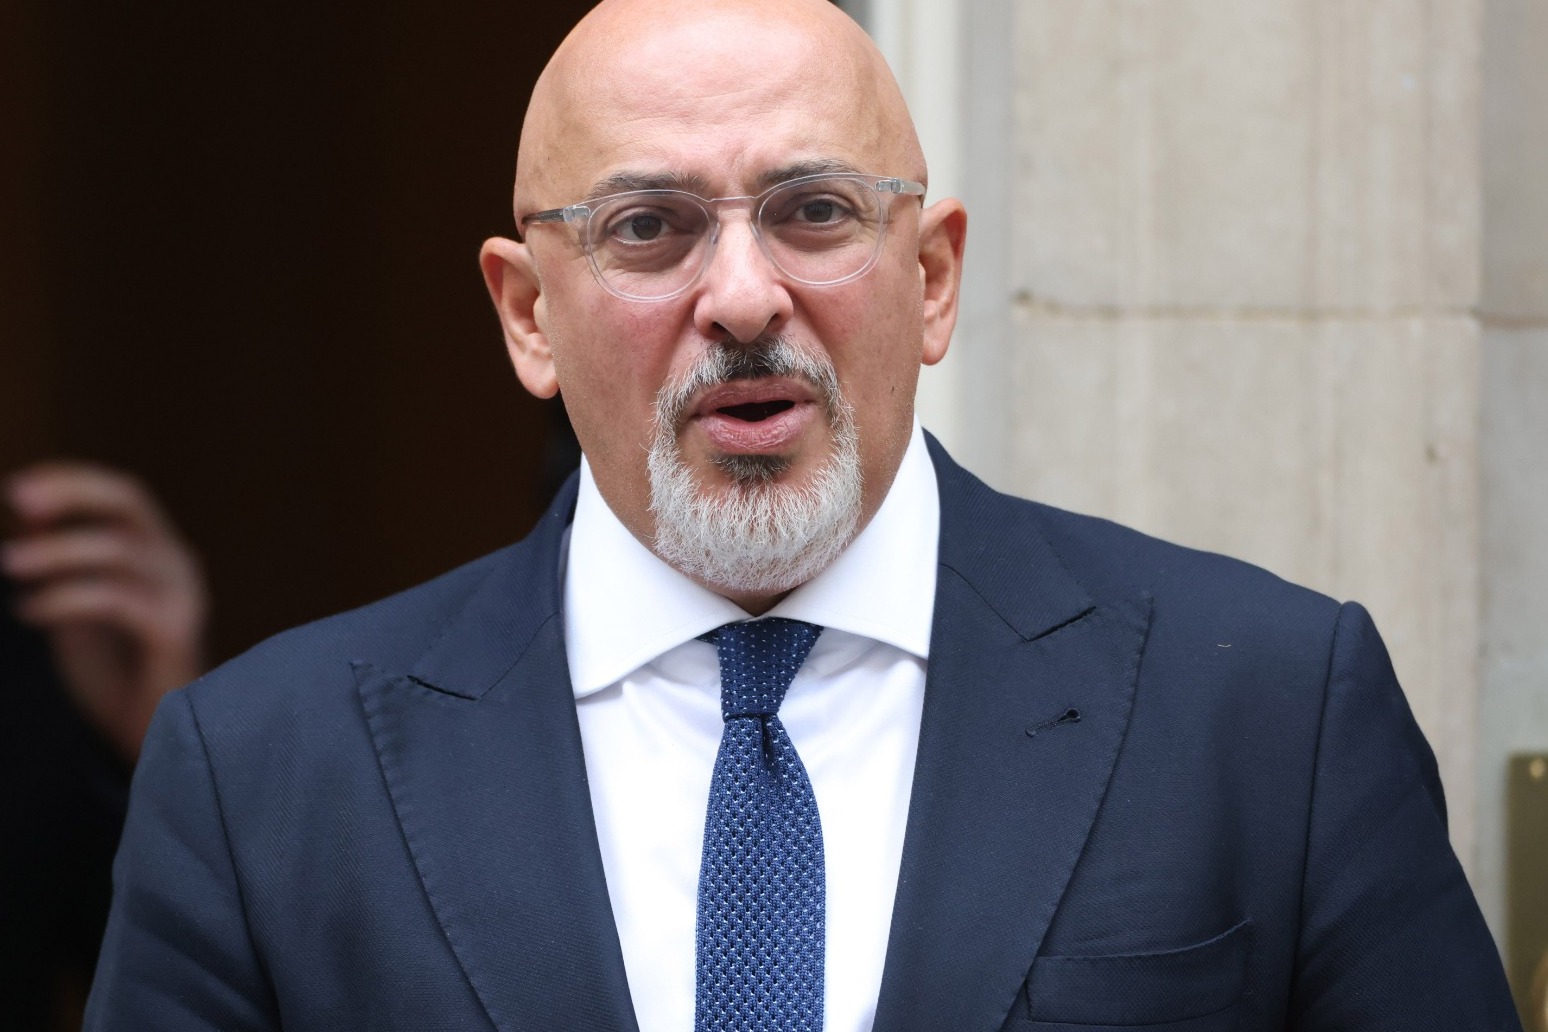 Nadhim Zahawi says there are ‘no excuses’ for online learning at universities 